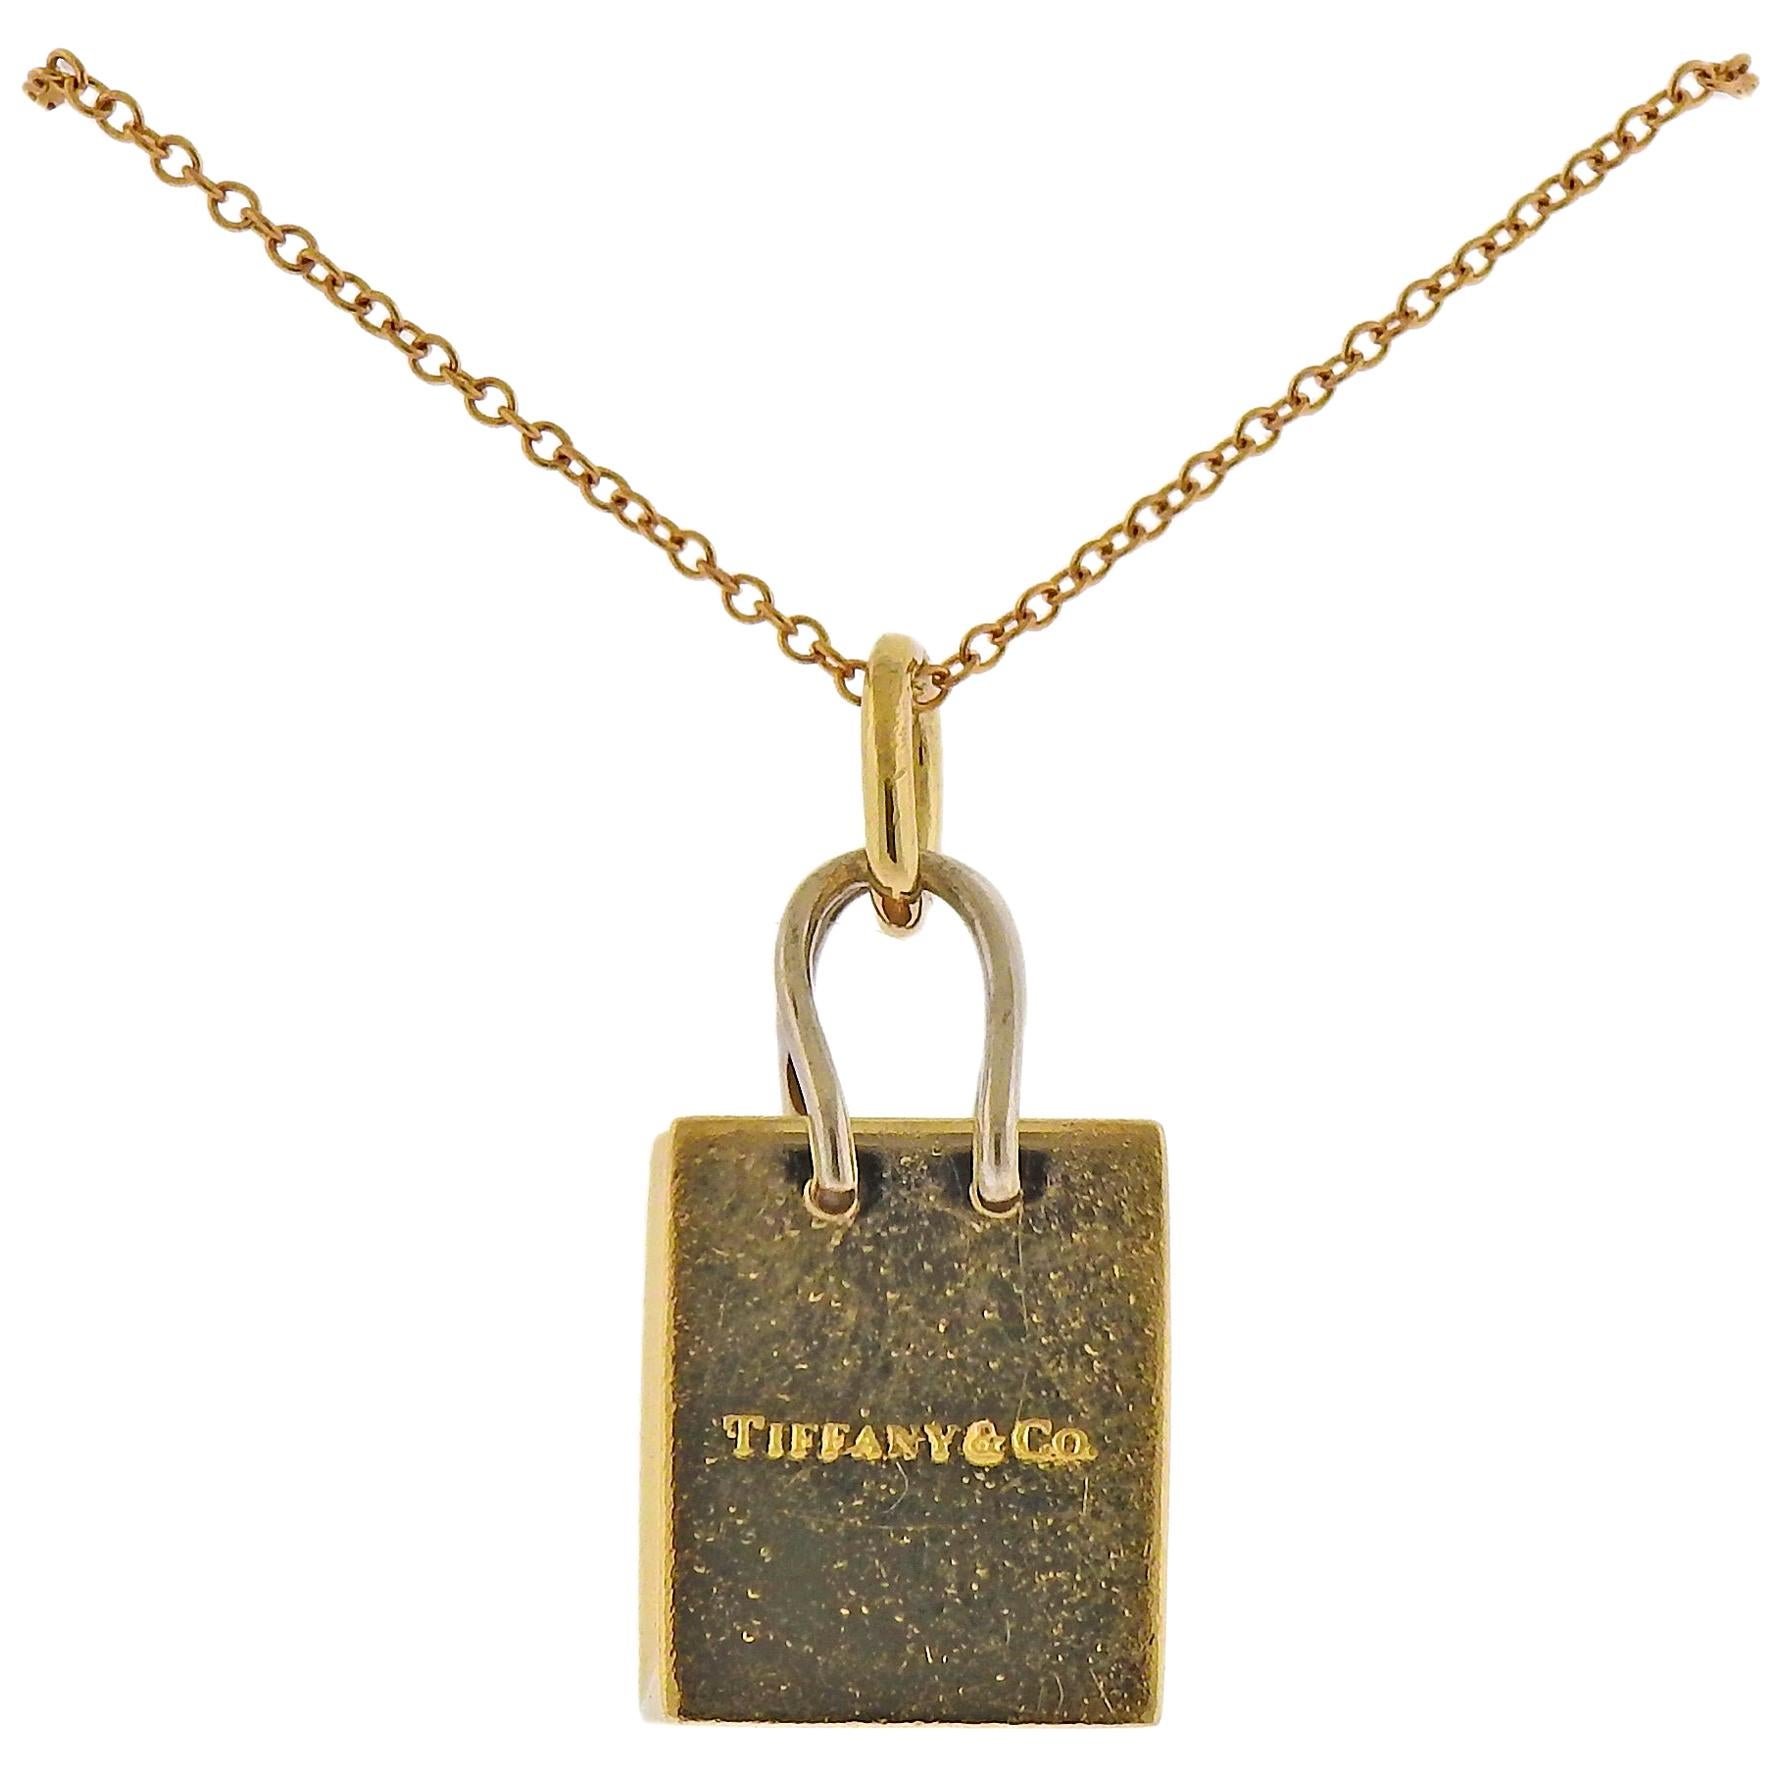 Tiffany & Co. Gift Bag Charm Pendant Gold Necklace